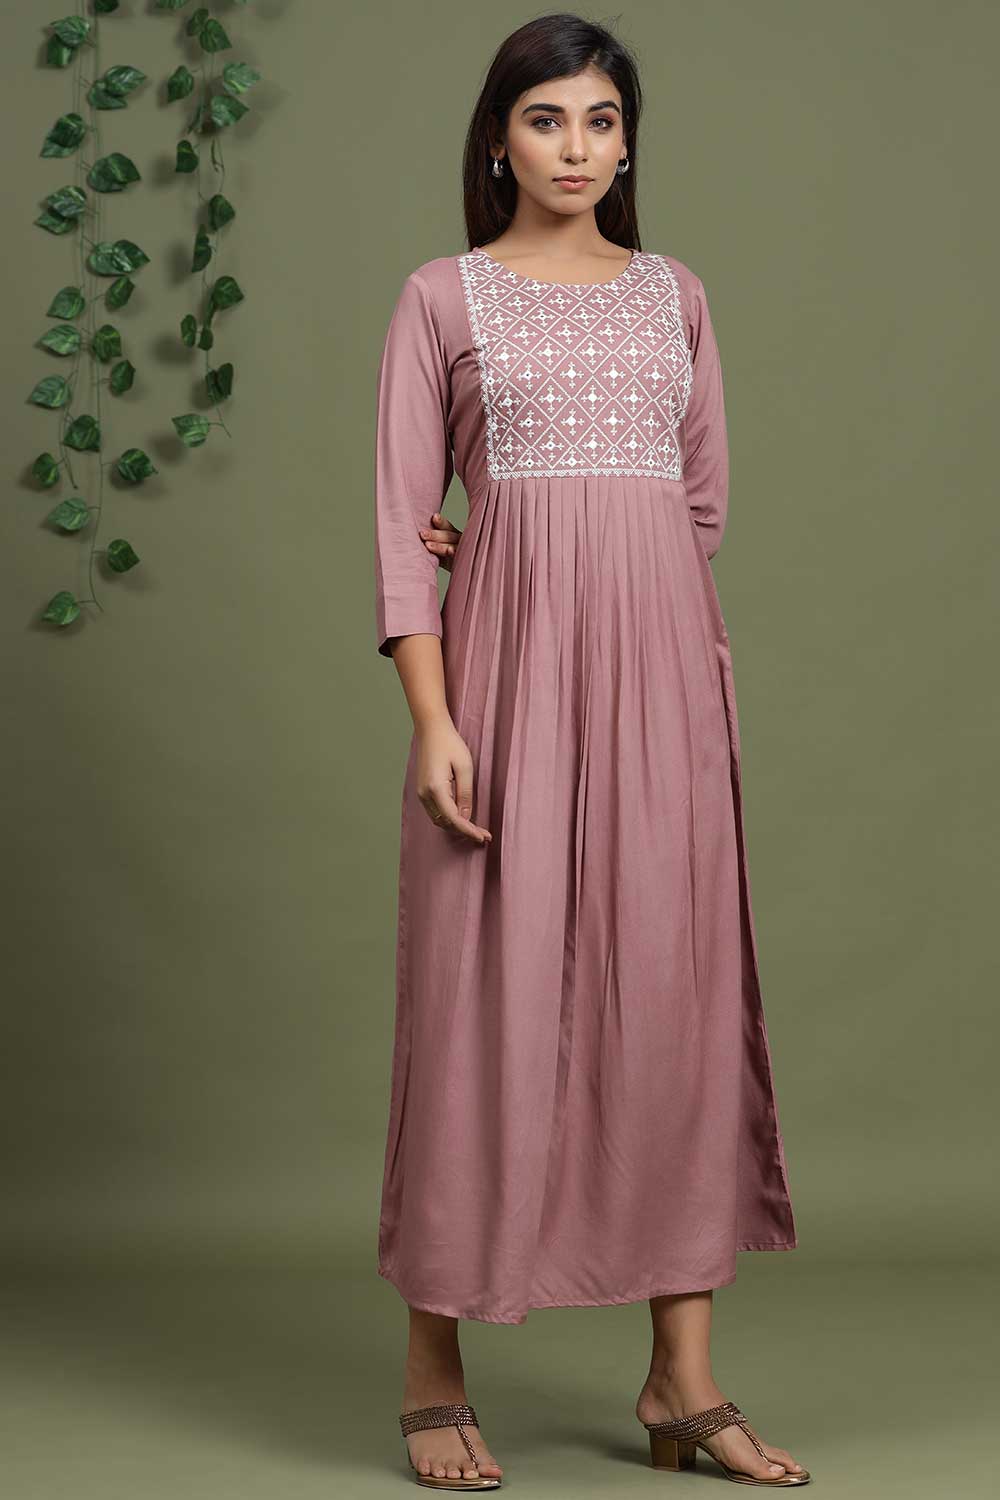 Buy Viscose Rayon Miror Embroidered Dress in Light Purple Online - Zoom In